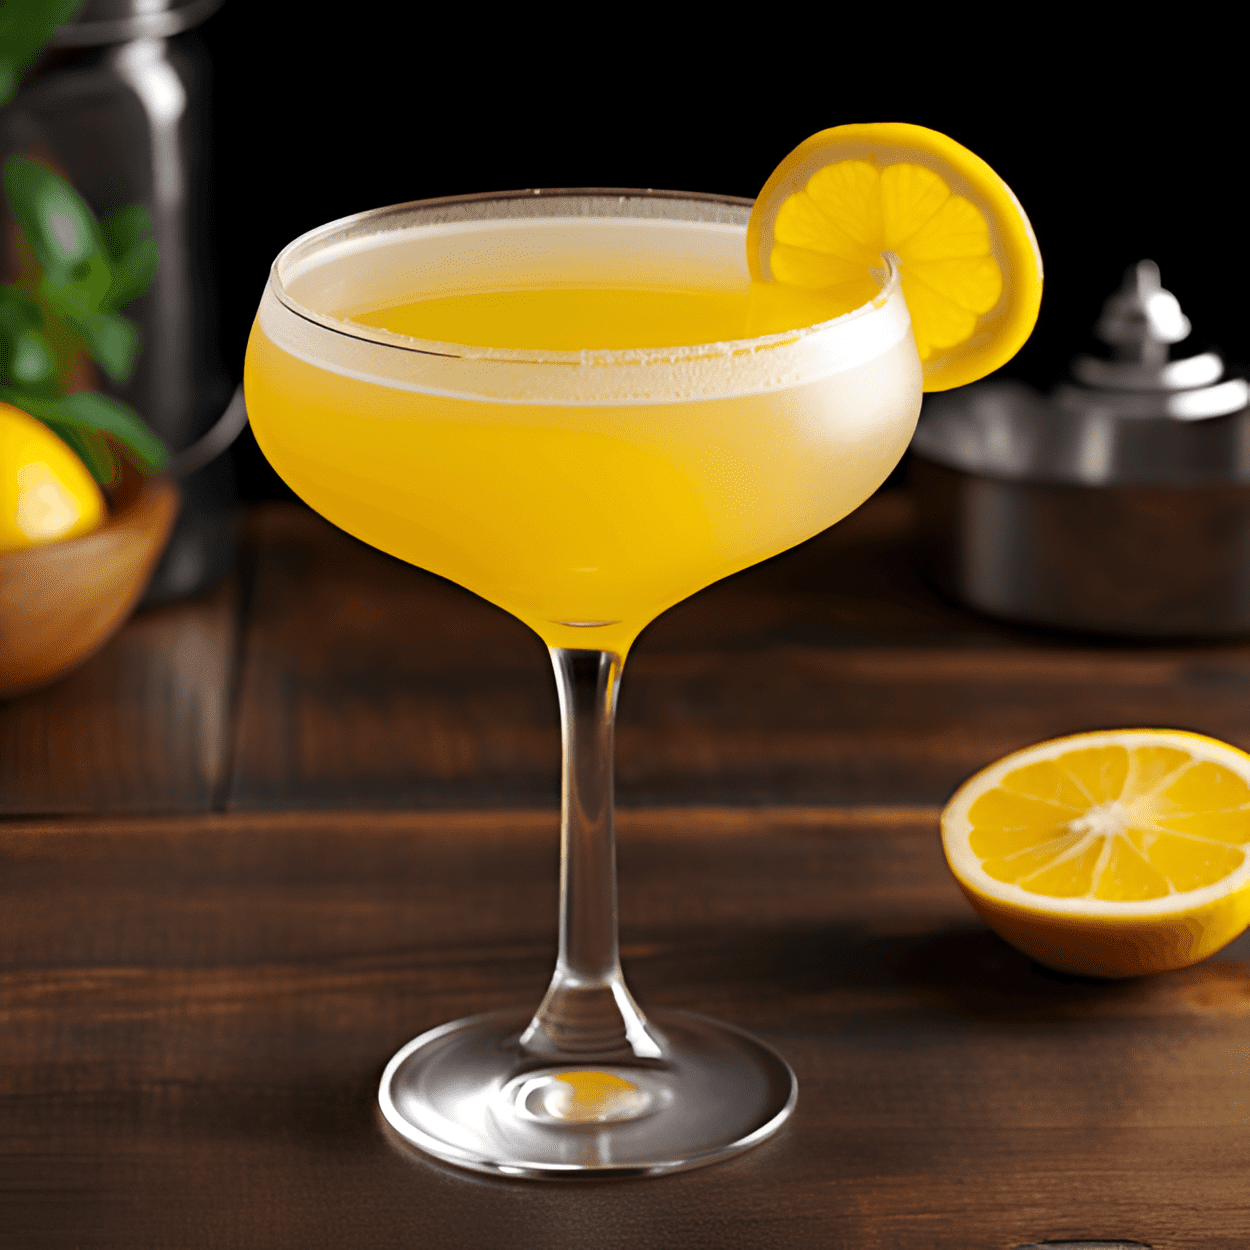 Streetcar Cocktail Recipe - The Streetcar cocktail has a delightful balance of sweet and sour. The Southern Comfort brings a fruity, spicy sweetness, while the fresh lemon juice adds a zesty sour note. The Cointreau adds a hint of bitter orange flavor, making the cocktail complex and refreshing.